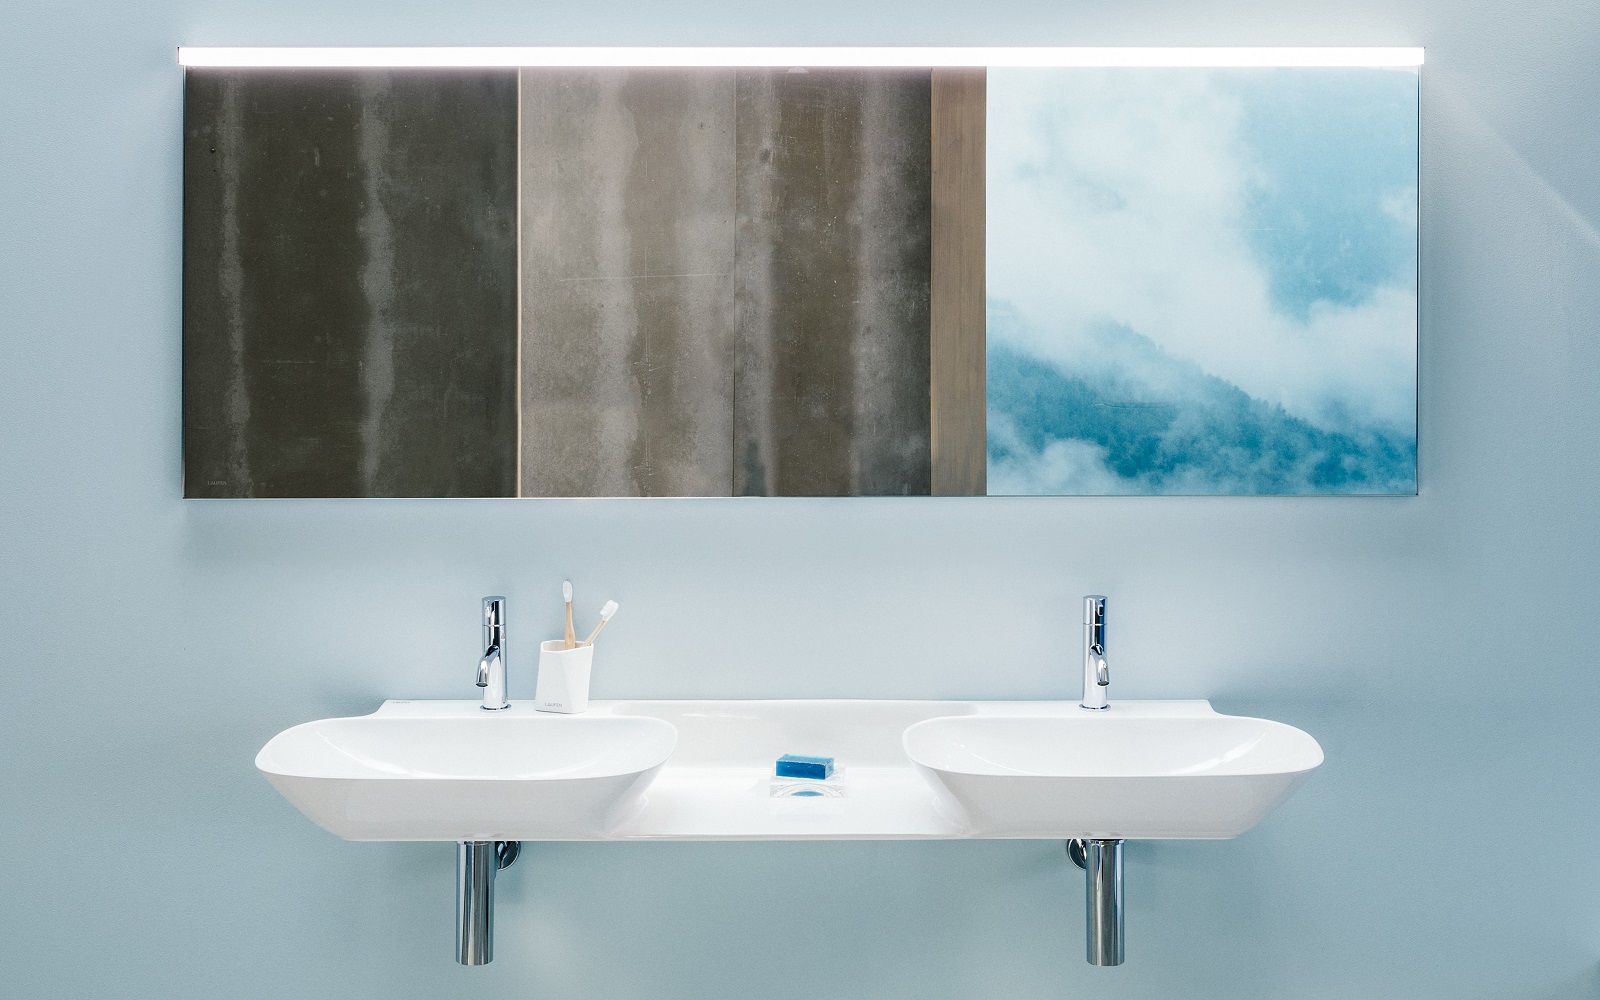 double basin from LAUFEN with wall hung vanity above with mirror and reflections of clouds